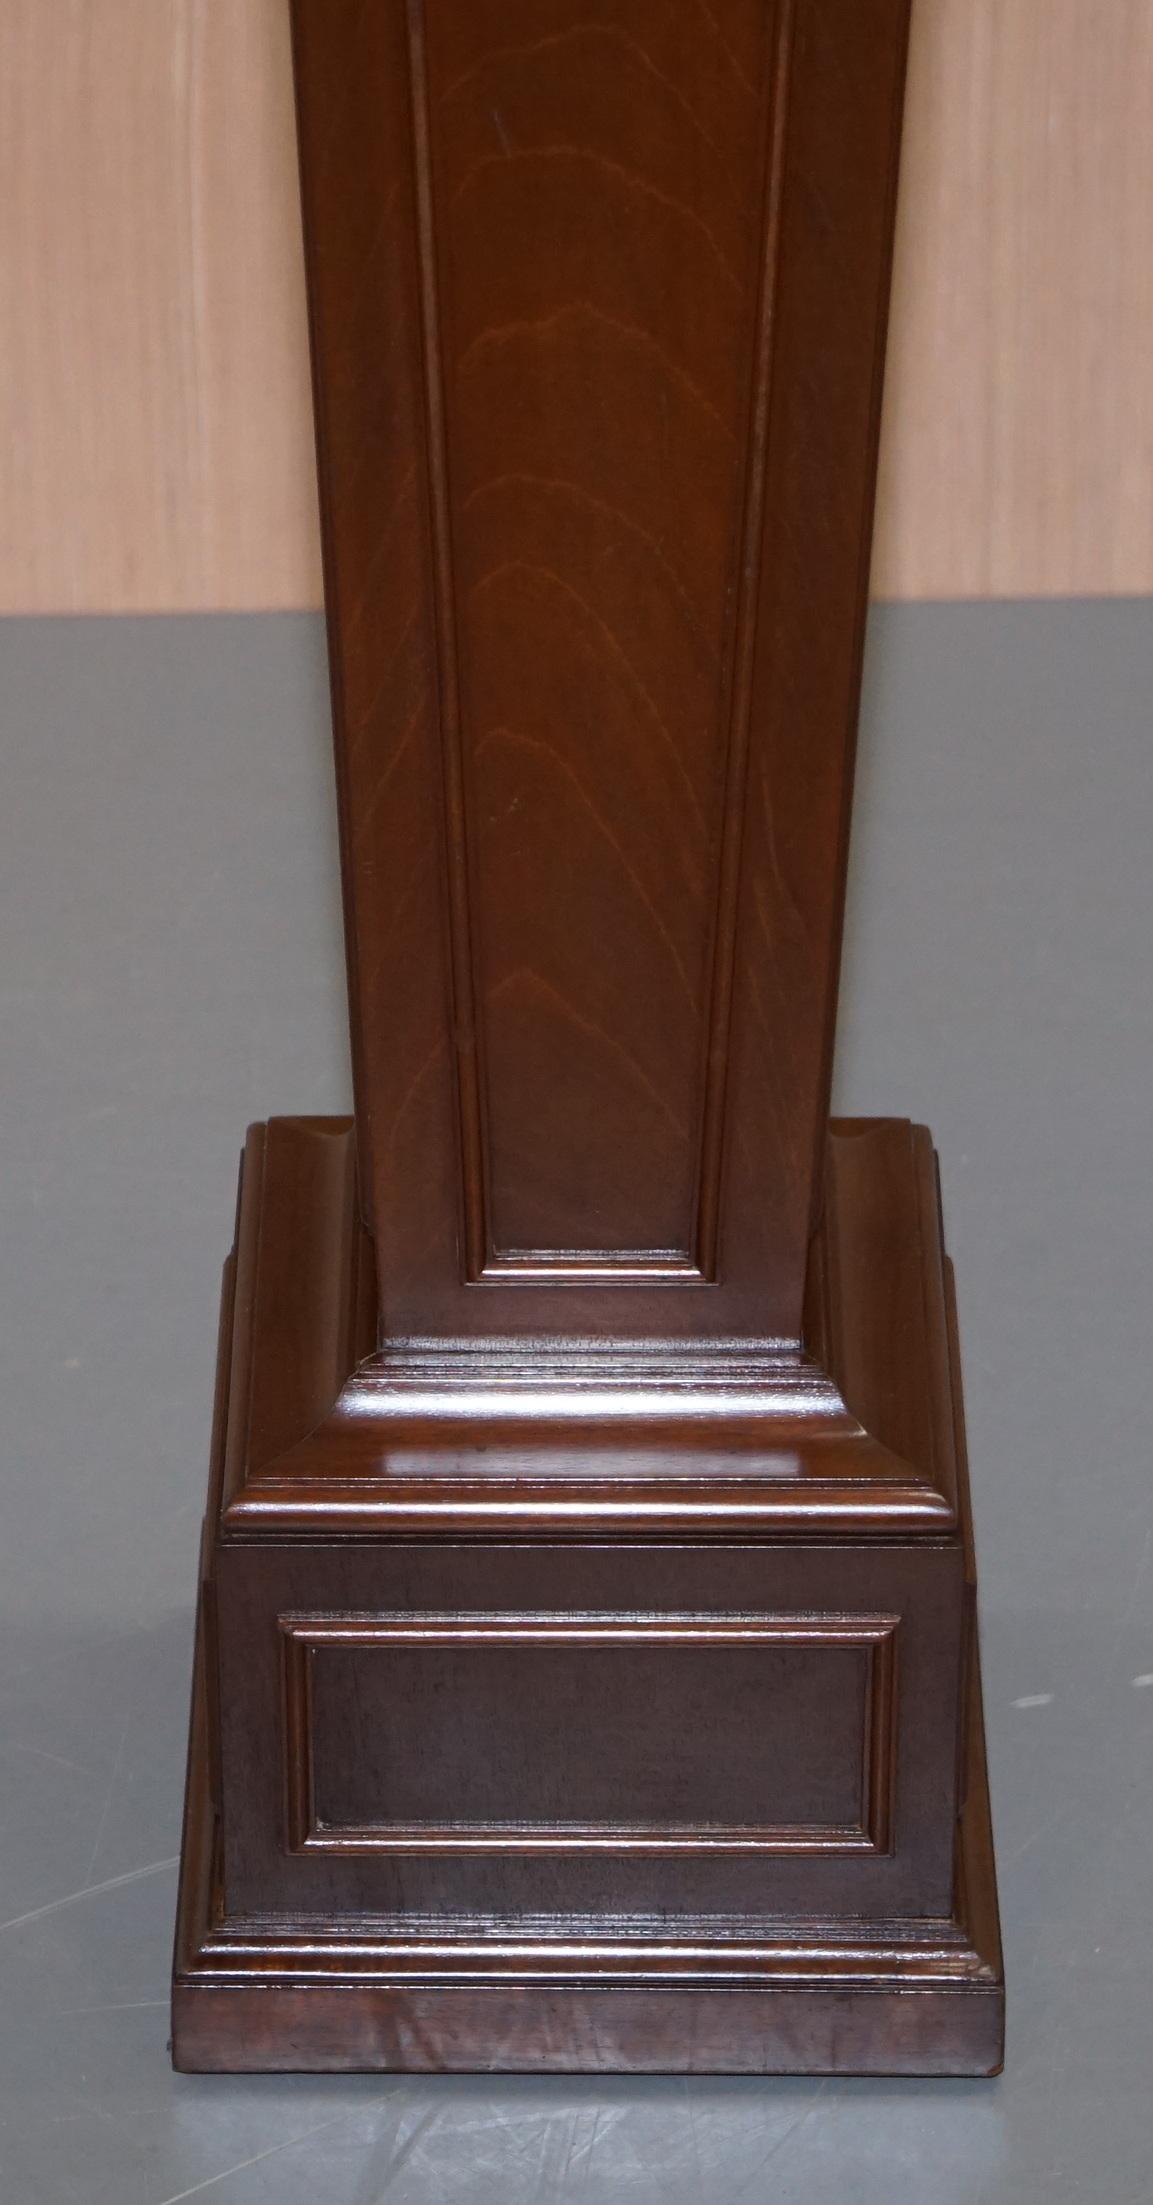 Hand-Crafted Regency Style Walnut circa 1900 Pedestal Jardiniere Stand for Busts Statues Etc